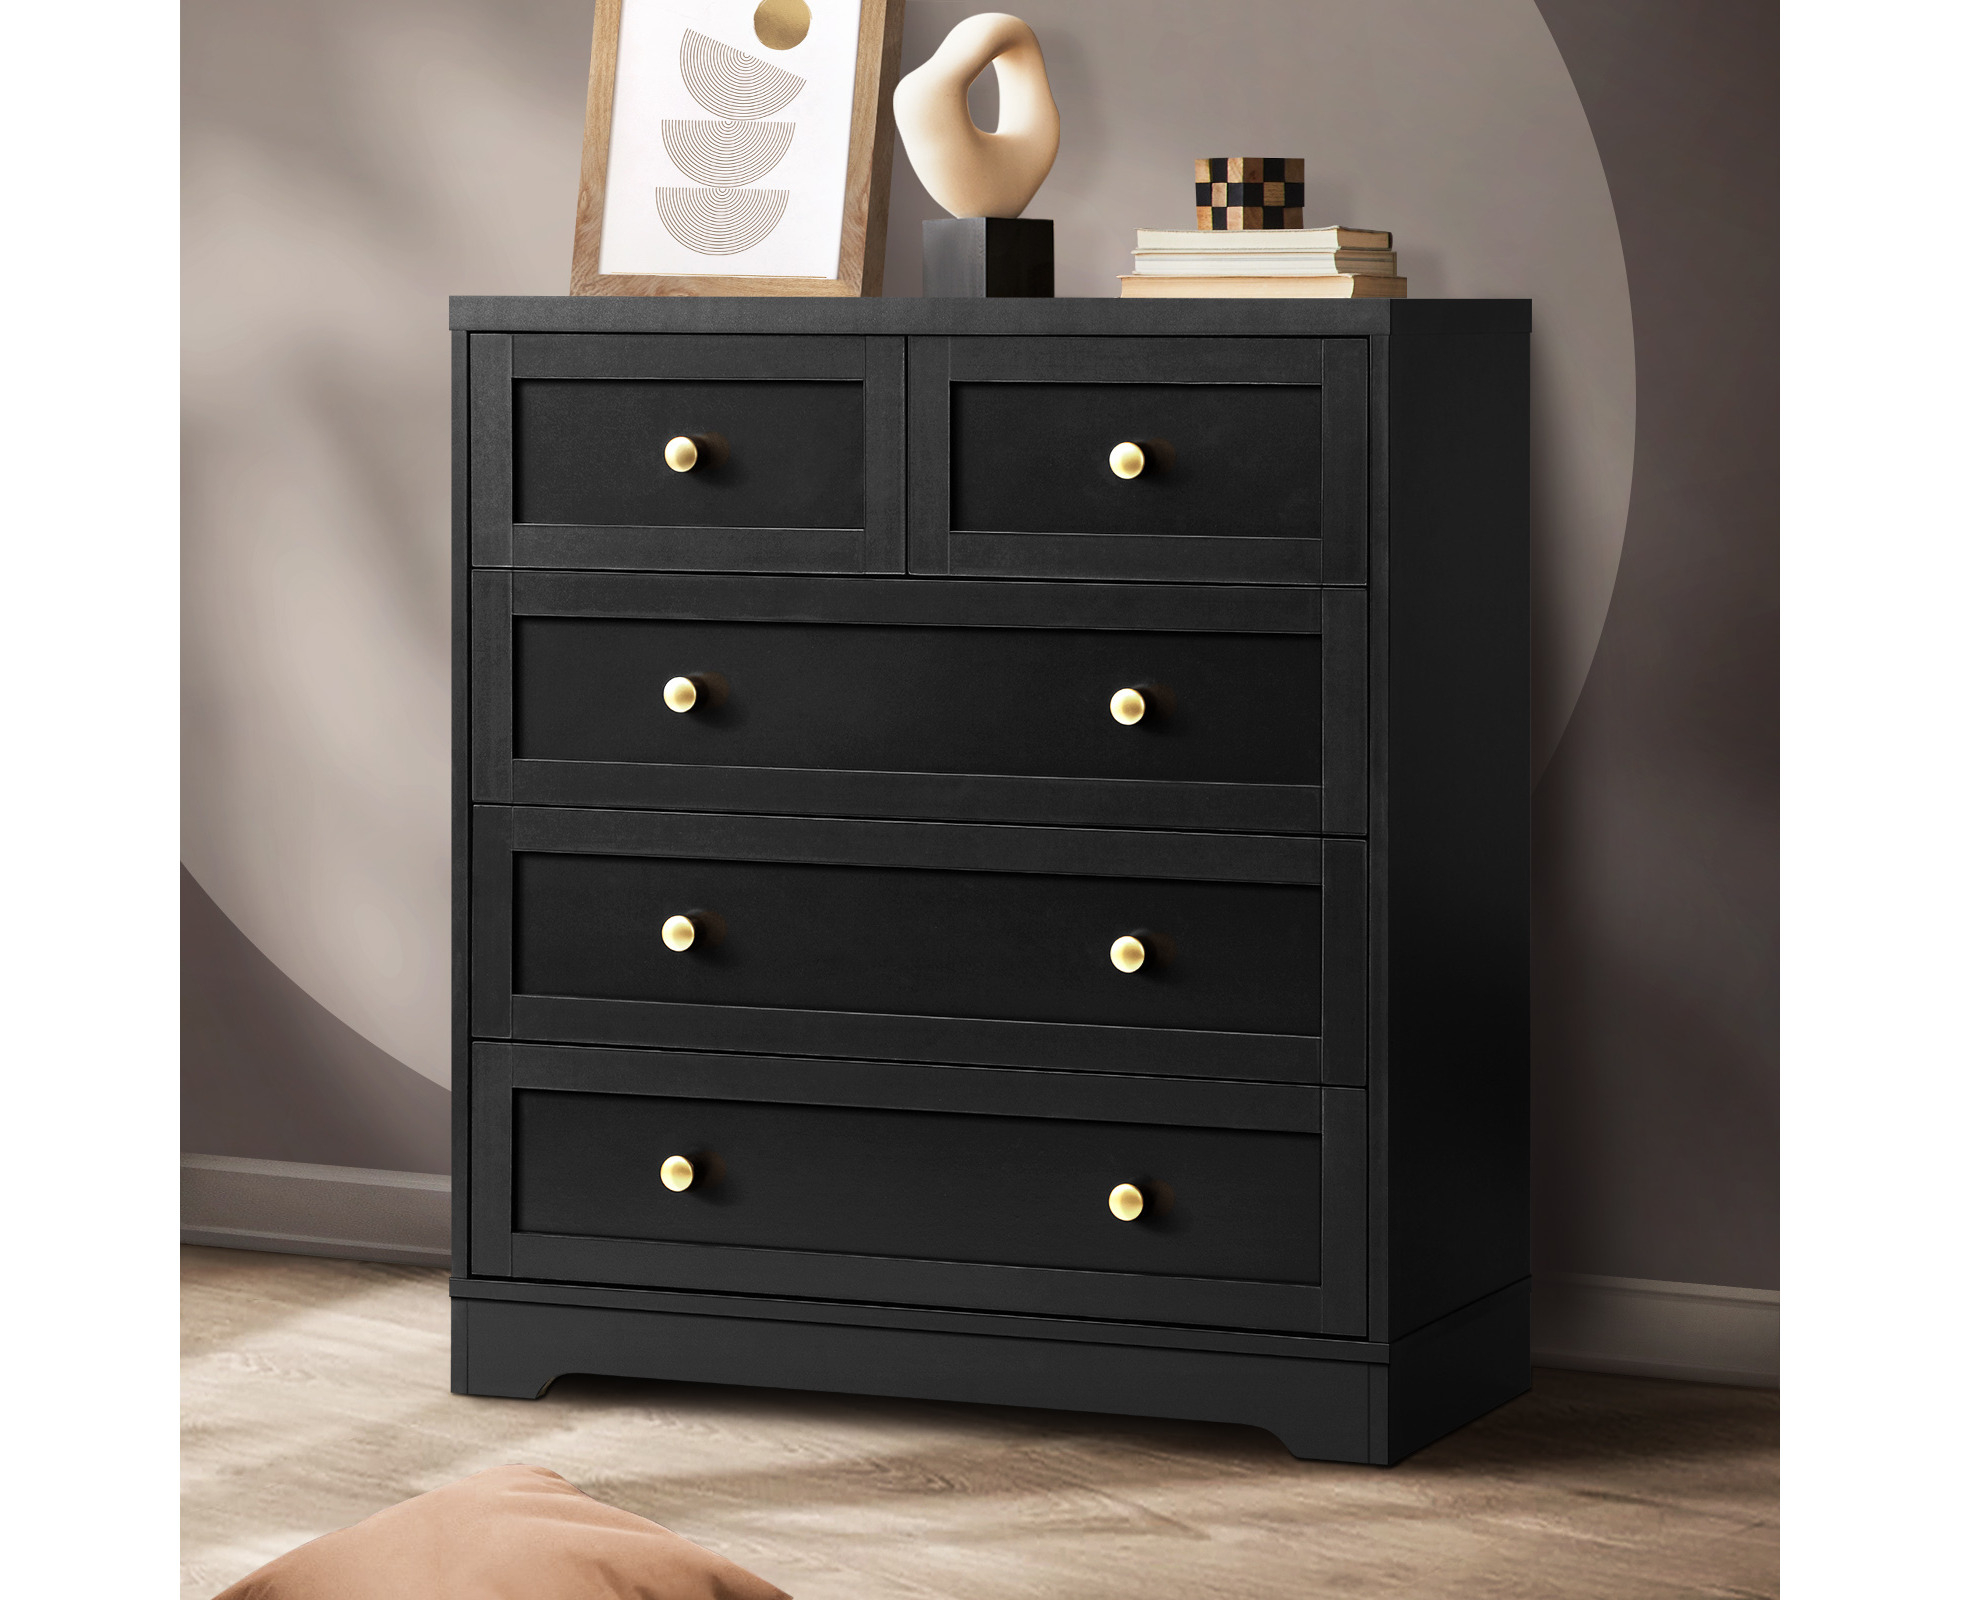 Oikiture 5 Chest of Drawers Tallboy Dresser Table Storage Cabinet Black